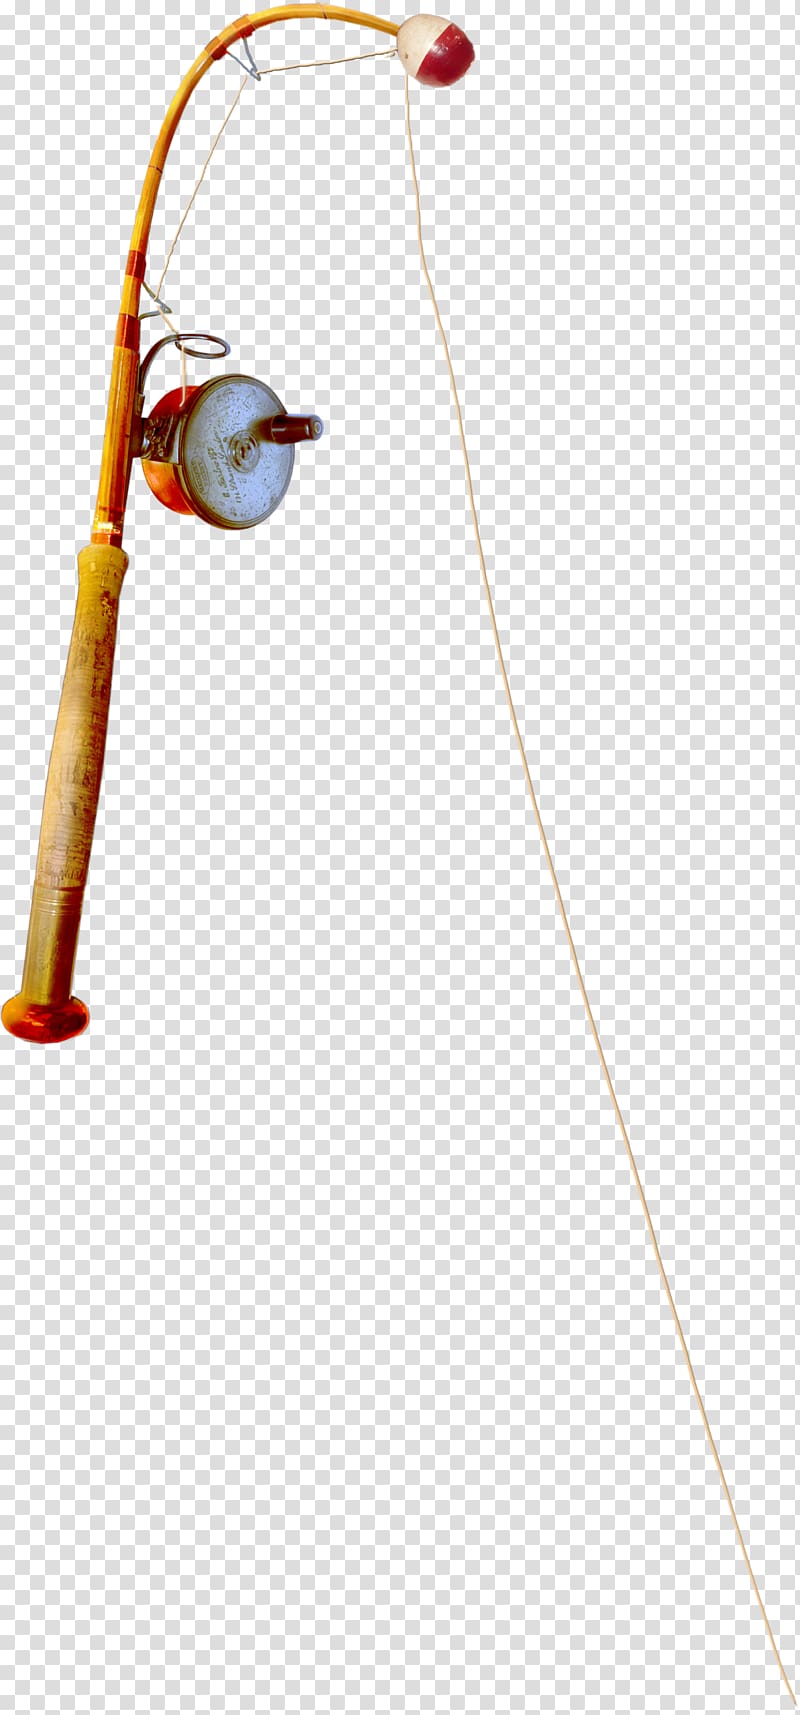 Fishing rod Angling Fishing tackle, Cartoon fishing rod transparent background PNG clipart